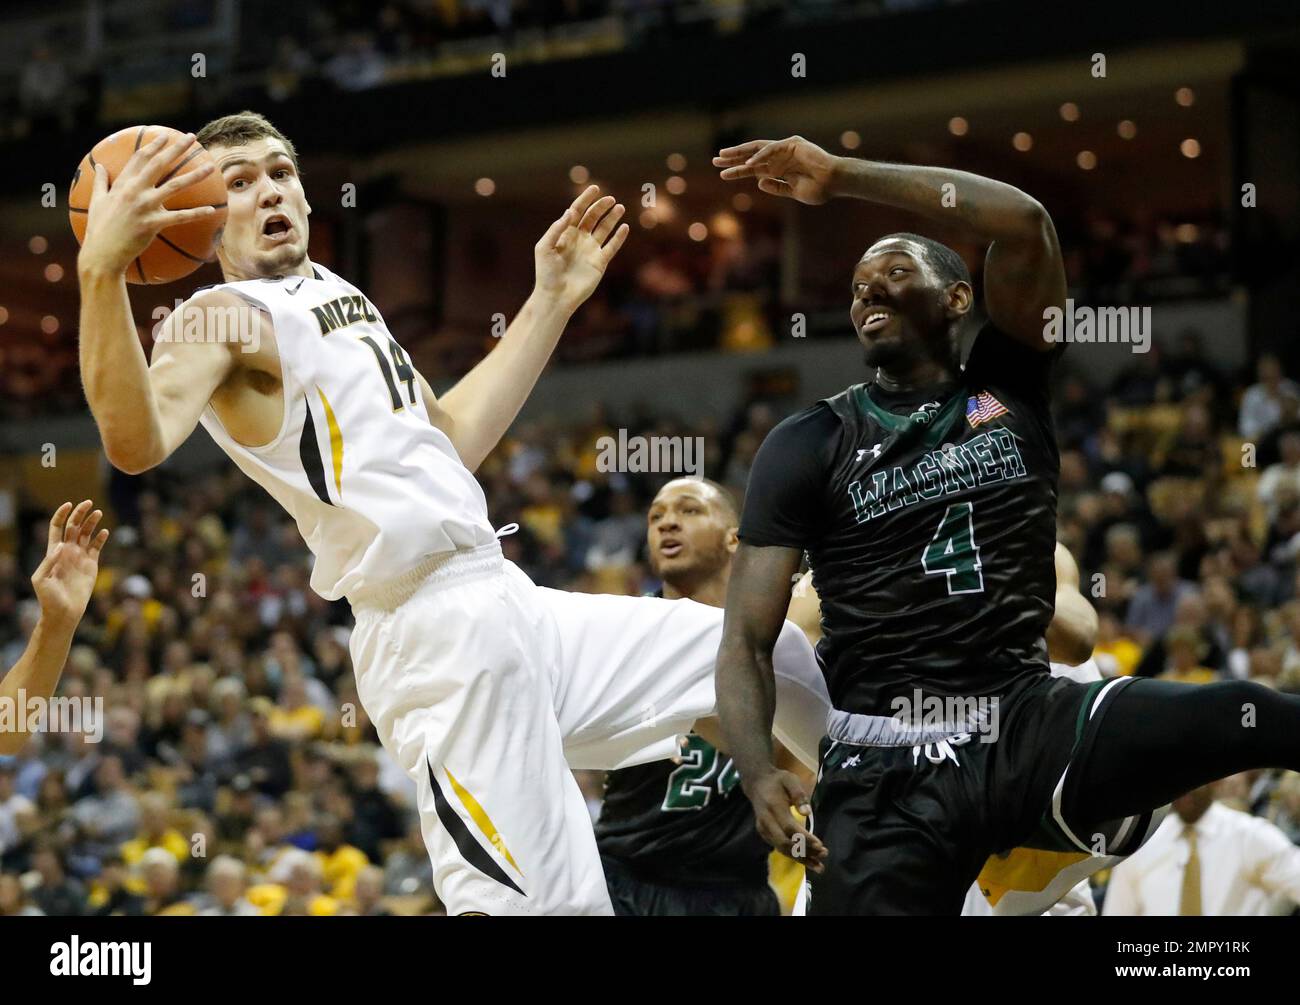 Missouri's Reed Nikko (14) pulls down a rebound as Wagner's AJ Sumbry (4)  watches during the